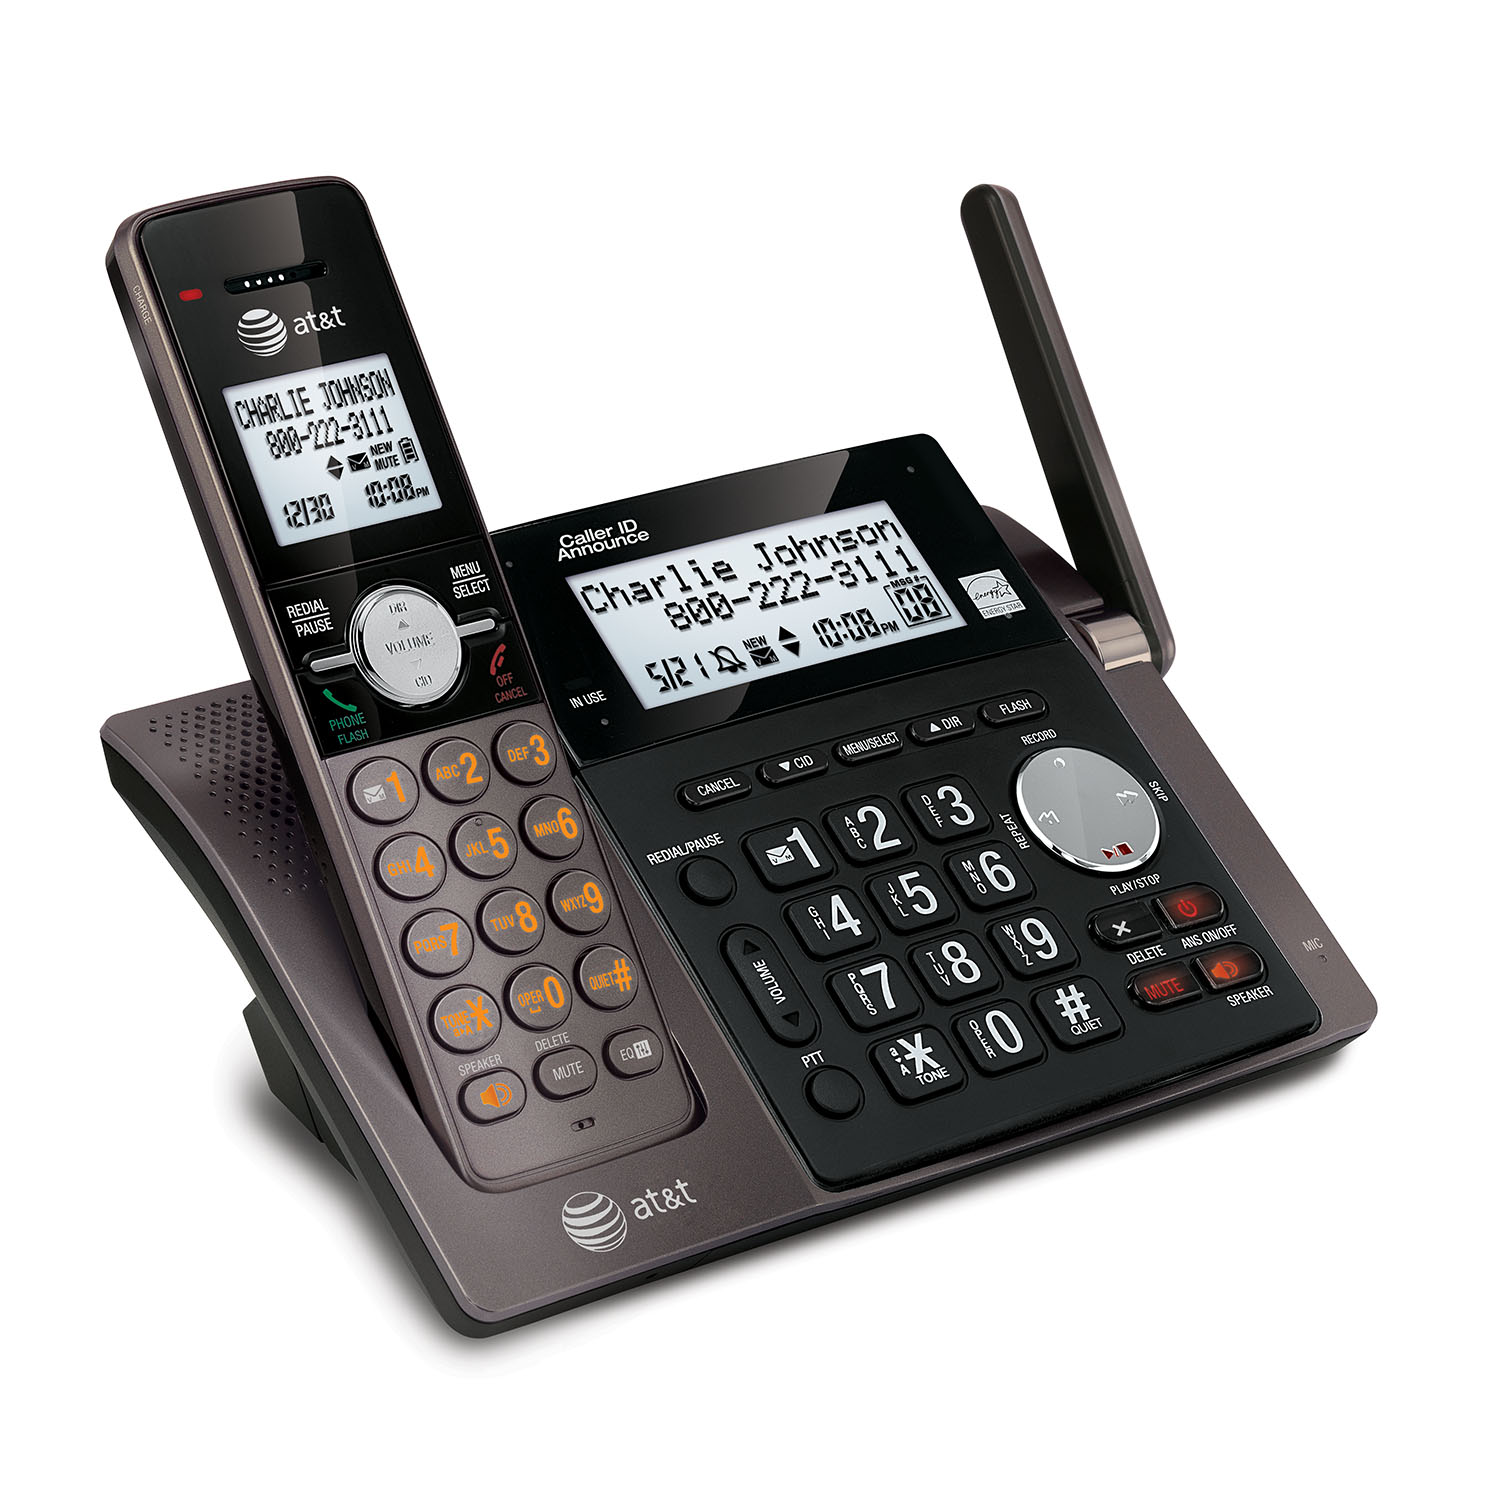 6 handset cordless answering system with caller ID/call waiting - view 2